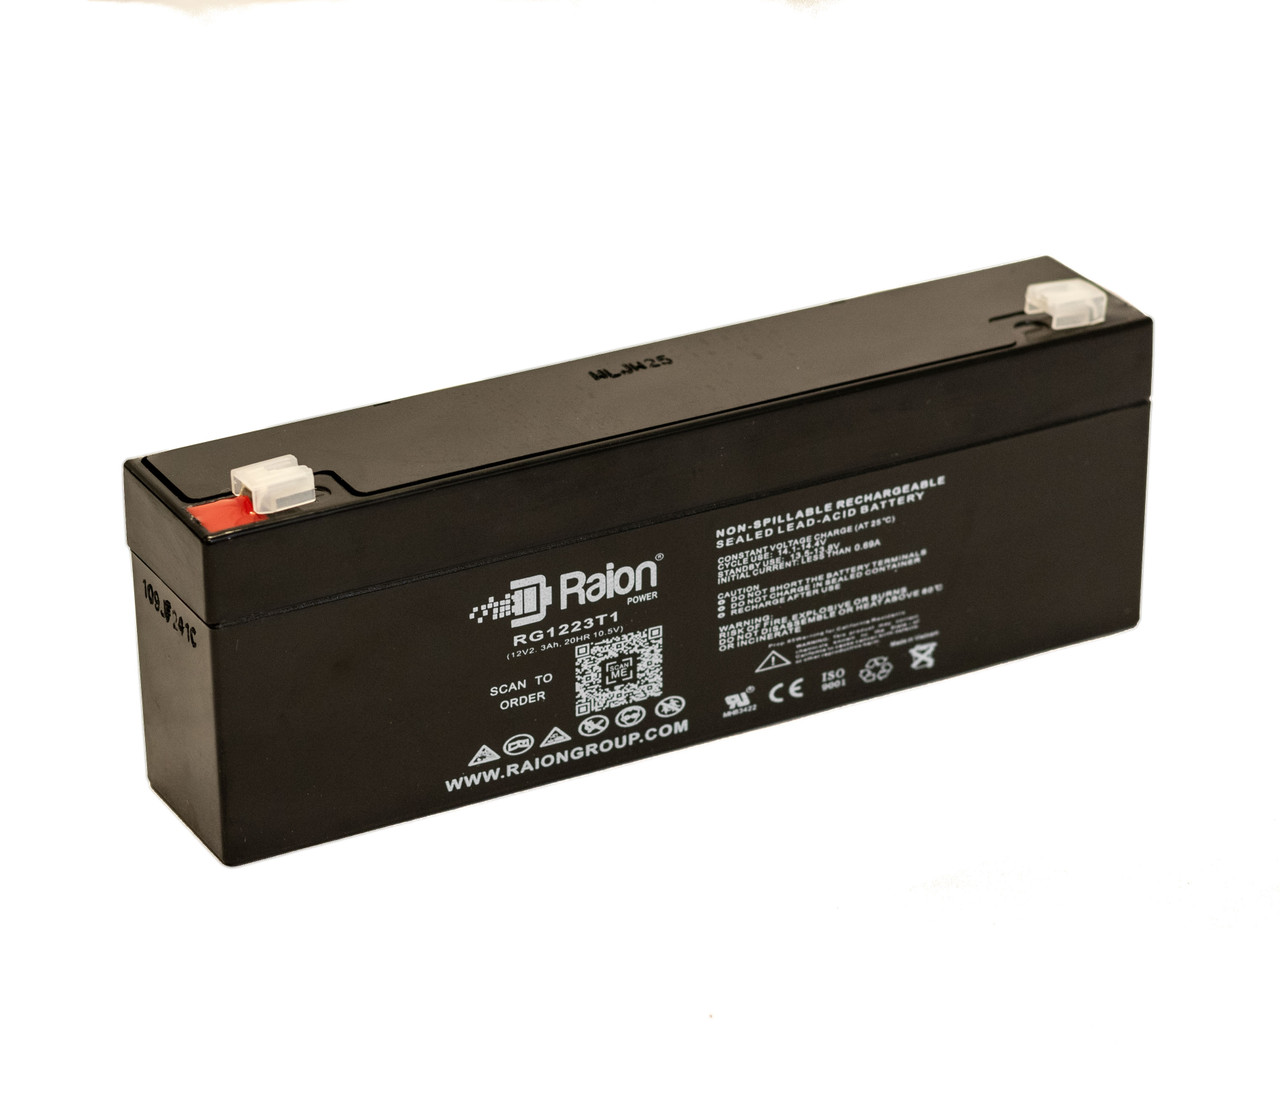 Raion Power RG1223T1 Replacement Battery for Nivec NV3658 Urodynamic Flometer